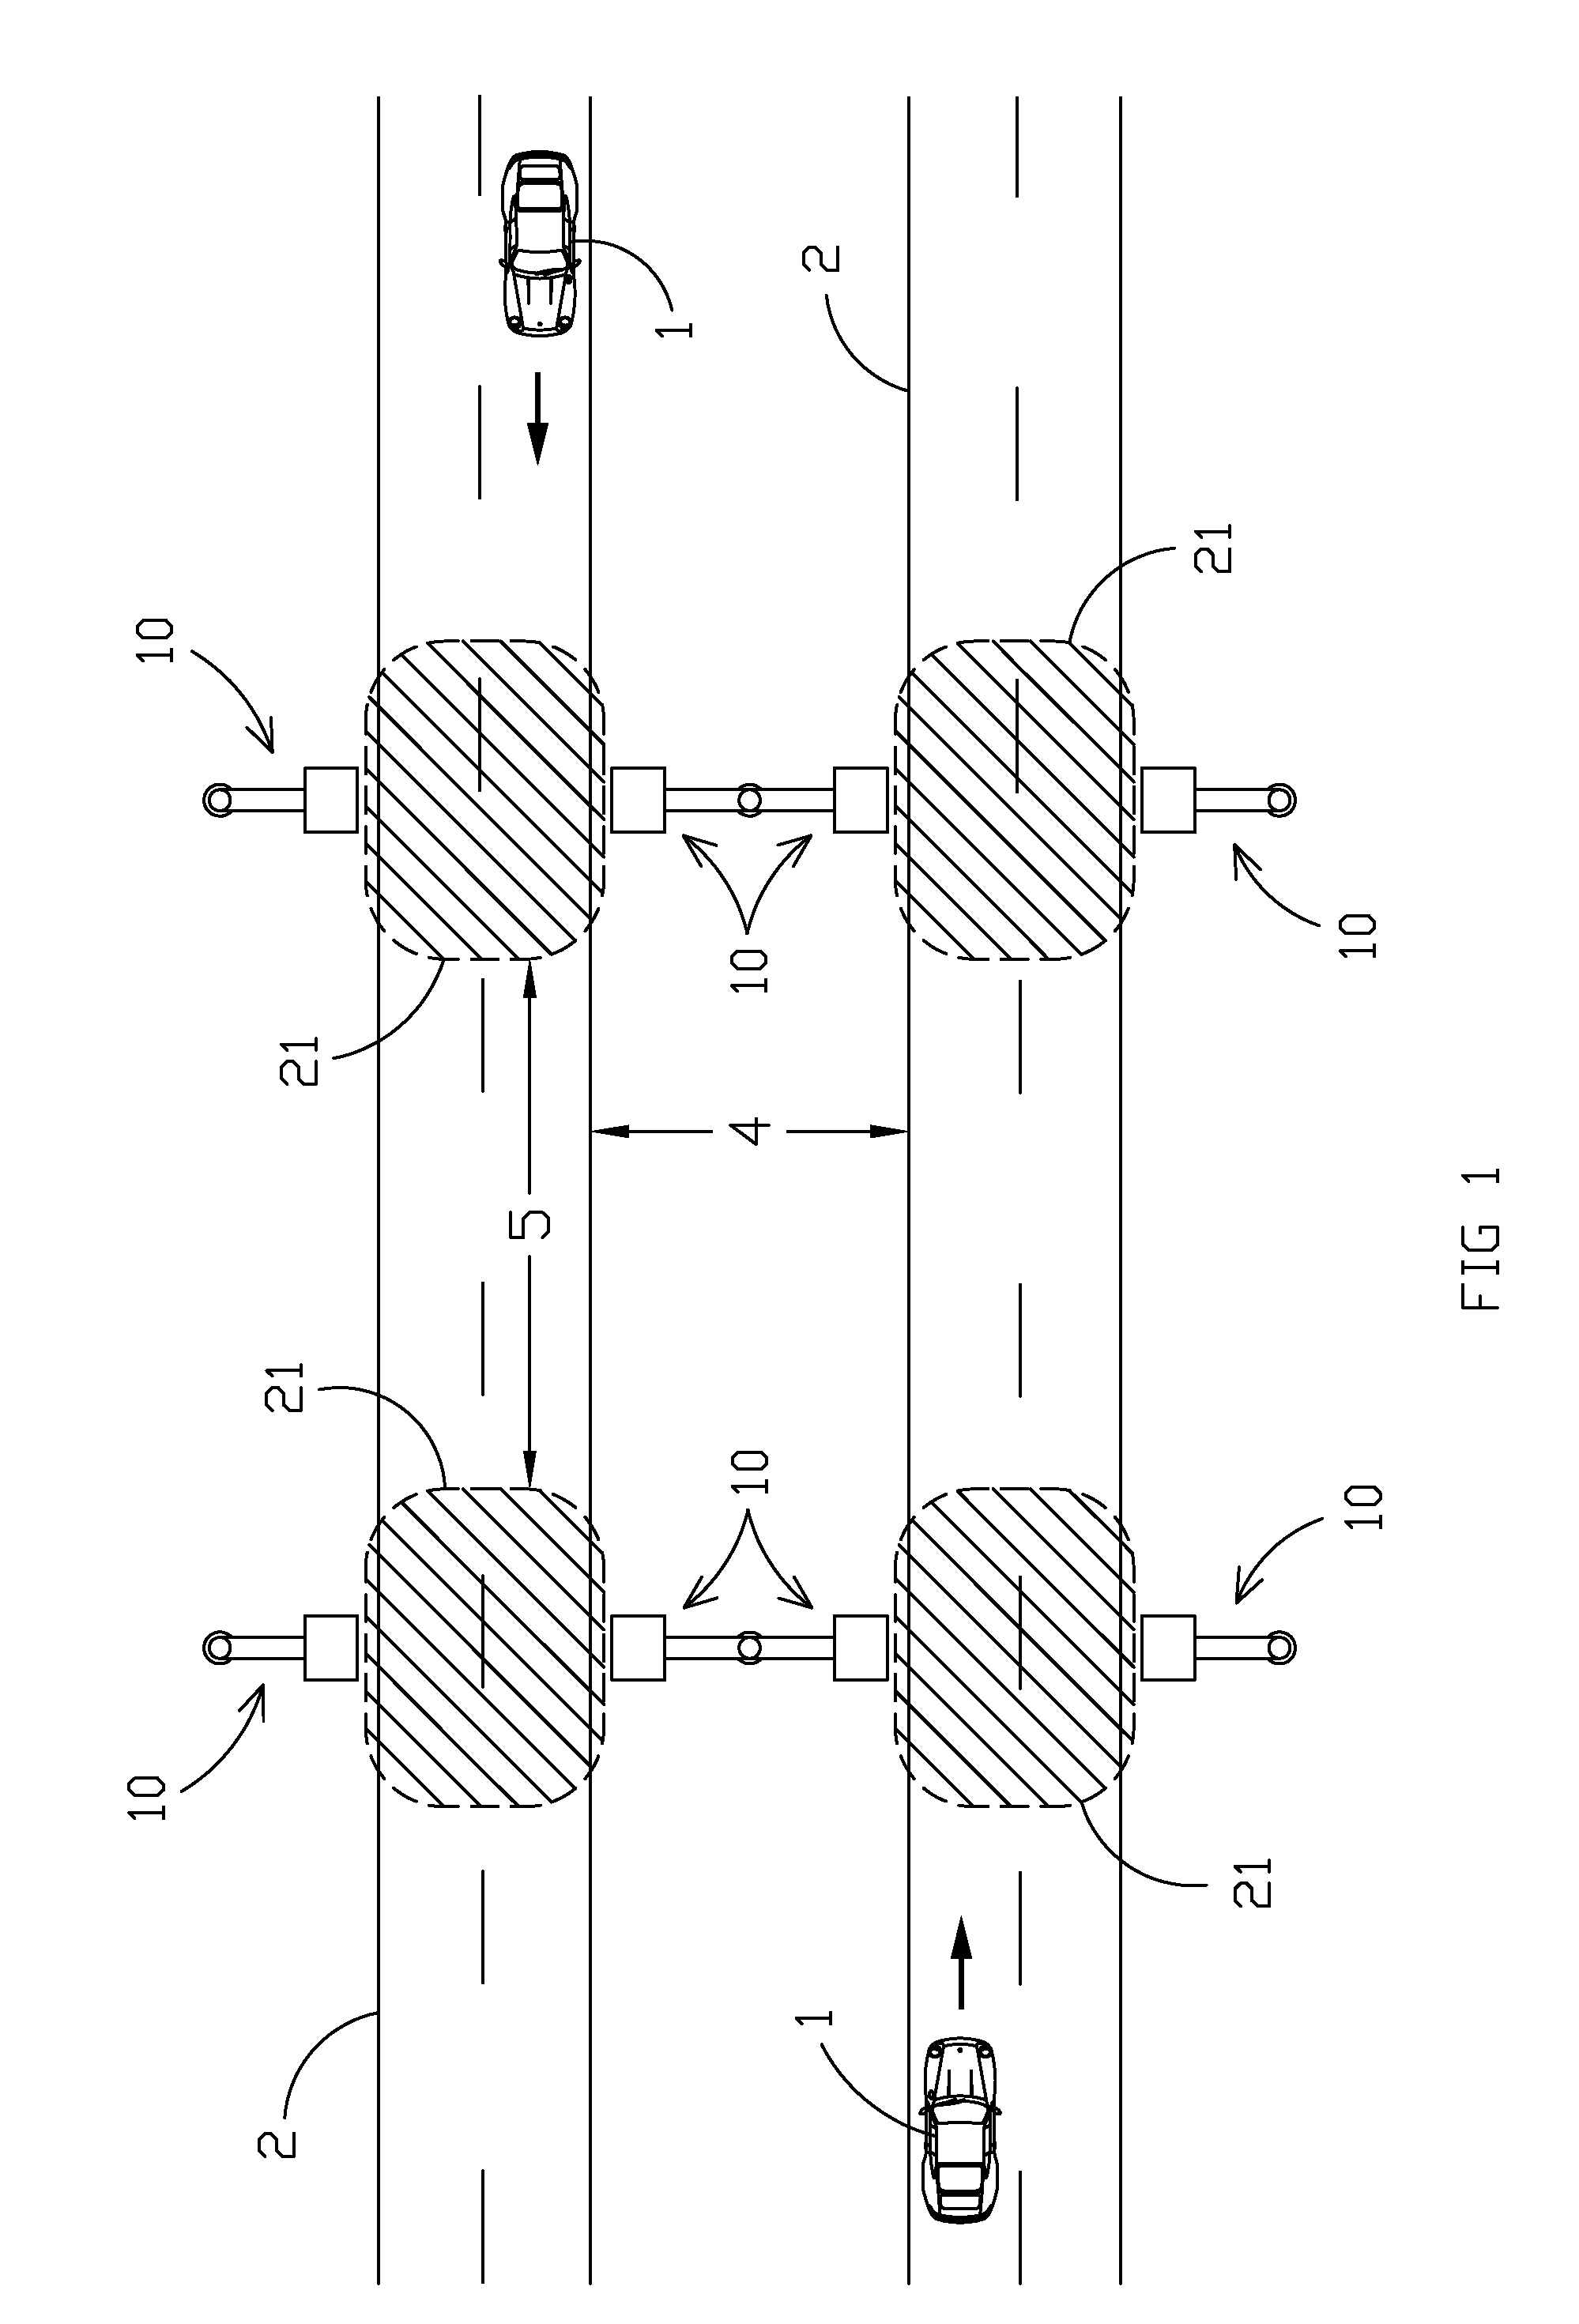 Apparatus, method, and system for roadway lighting using solid-state light sources